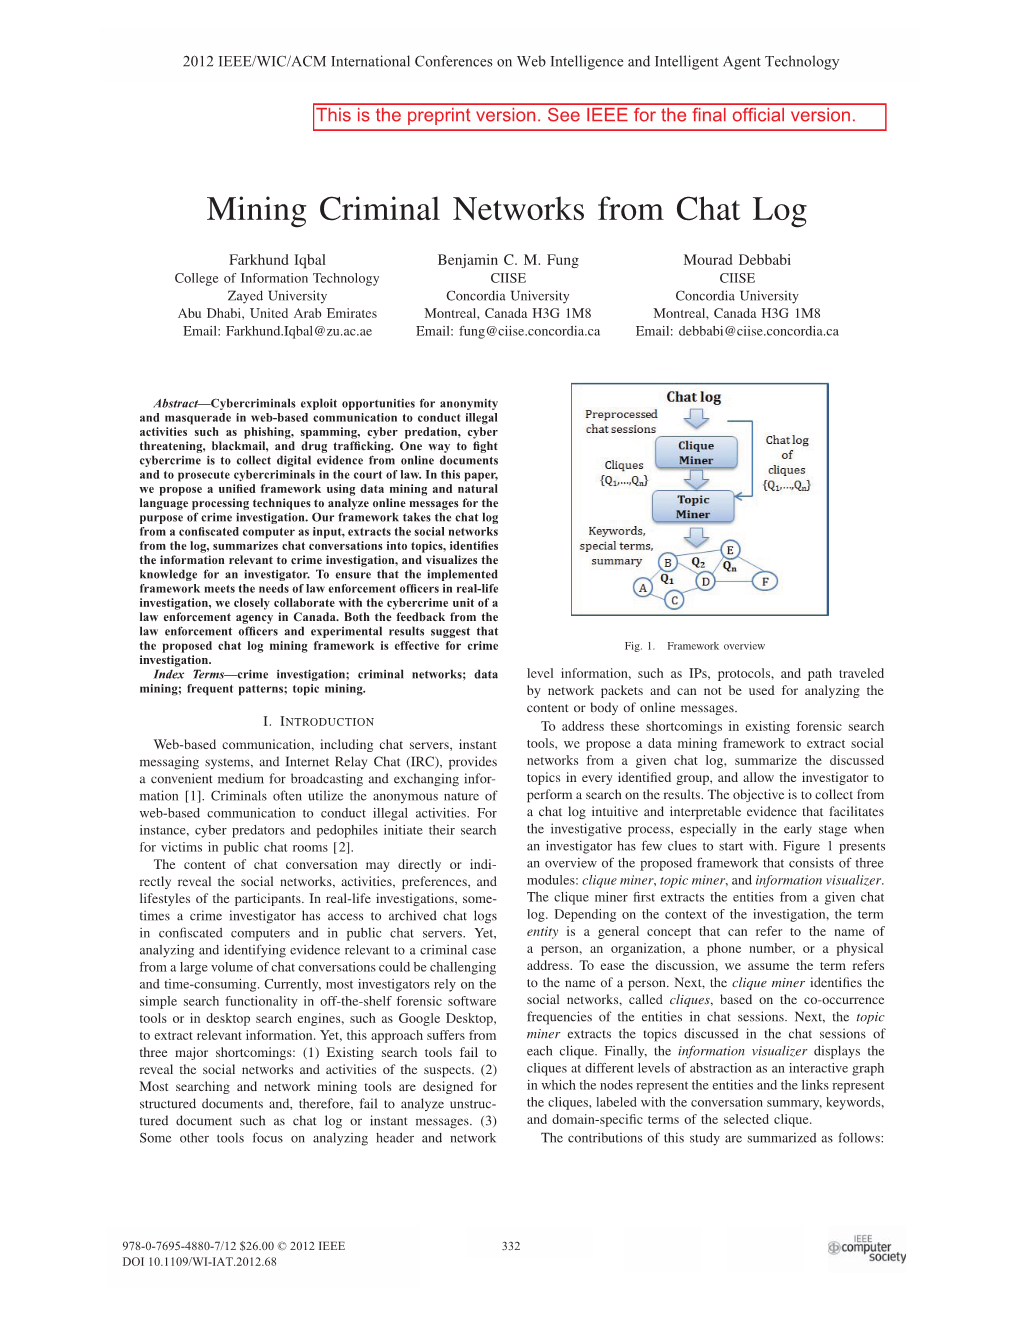 Mining Criminal Networks from Chat Log